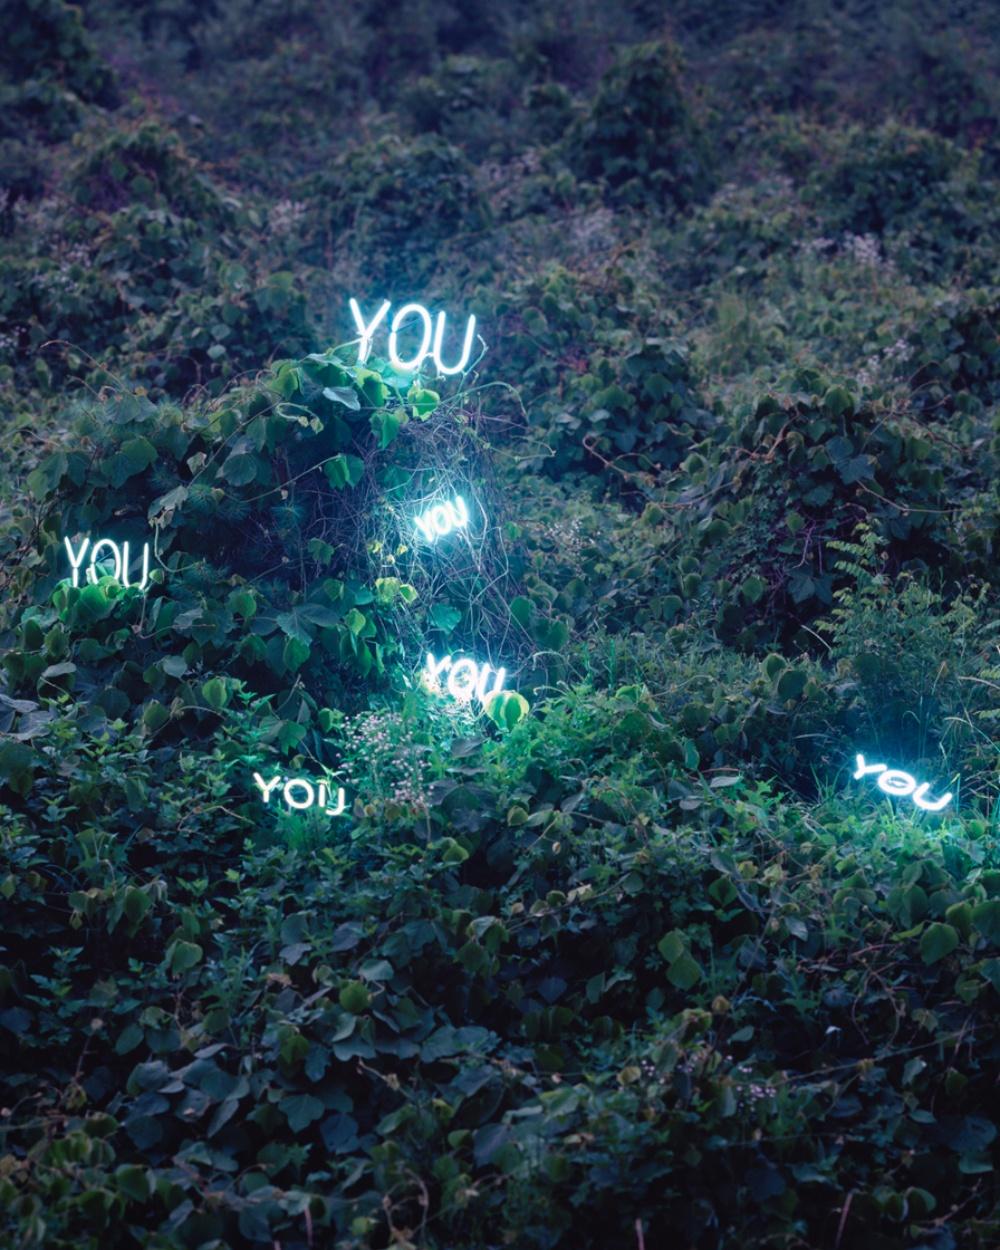 Jung LEE (*1972, South Korea)
You, You, You......, 2010
C-Type Print, Diasec
Sheet 125 x 100 cm (49 1/4 x 39 3/8 in.)
Frame 127,3 x 102,4 x 3,2 cm (50 1/8 x 40 3/8 x 1 1/4 in.)
Edition of 5, plus 2 AP; Ed. no. 2/5
Print only

– Biography 

Jung Lee